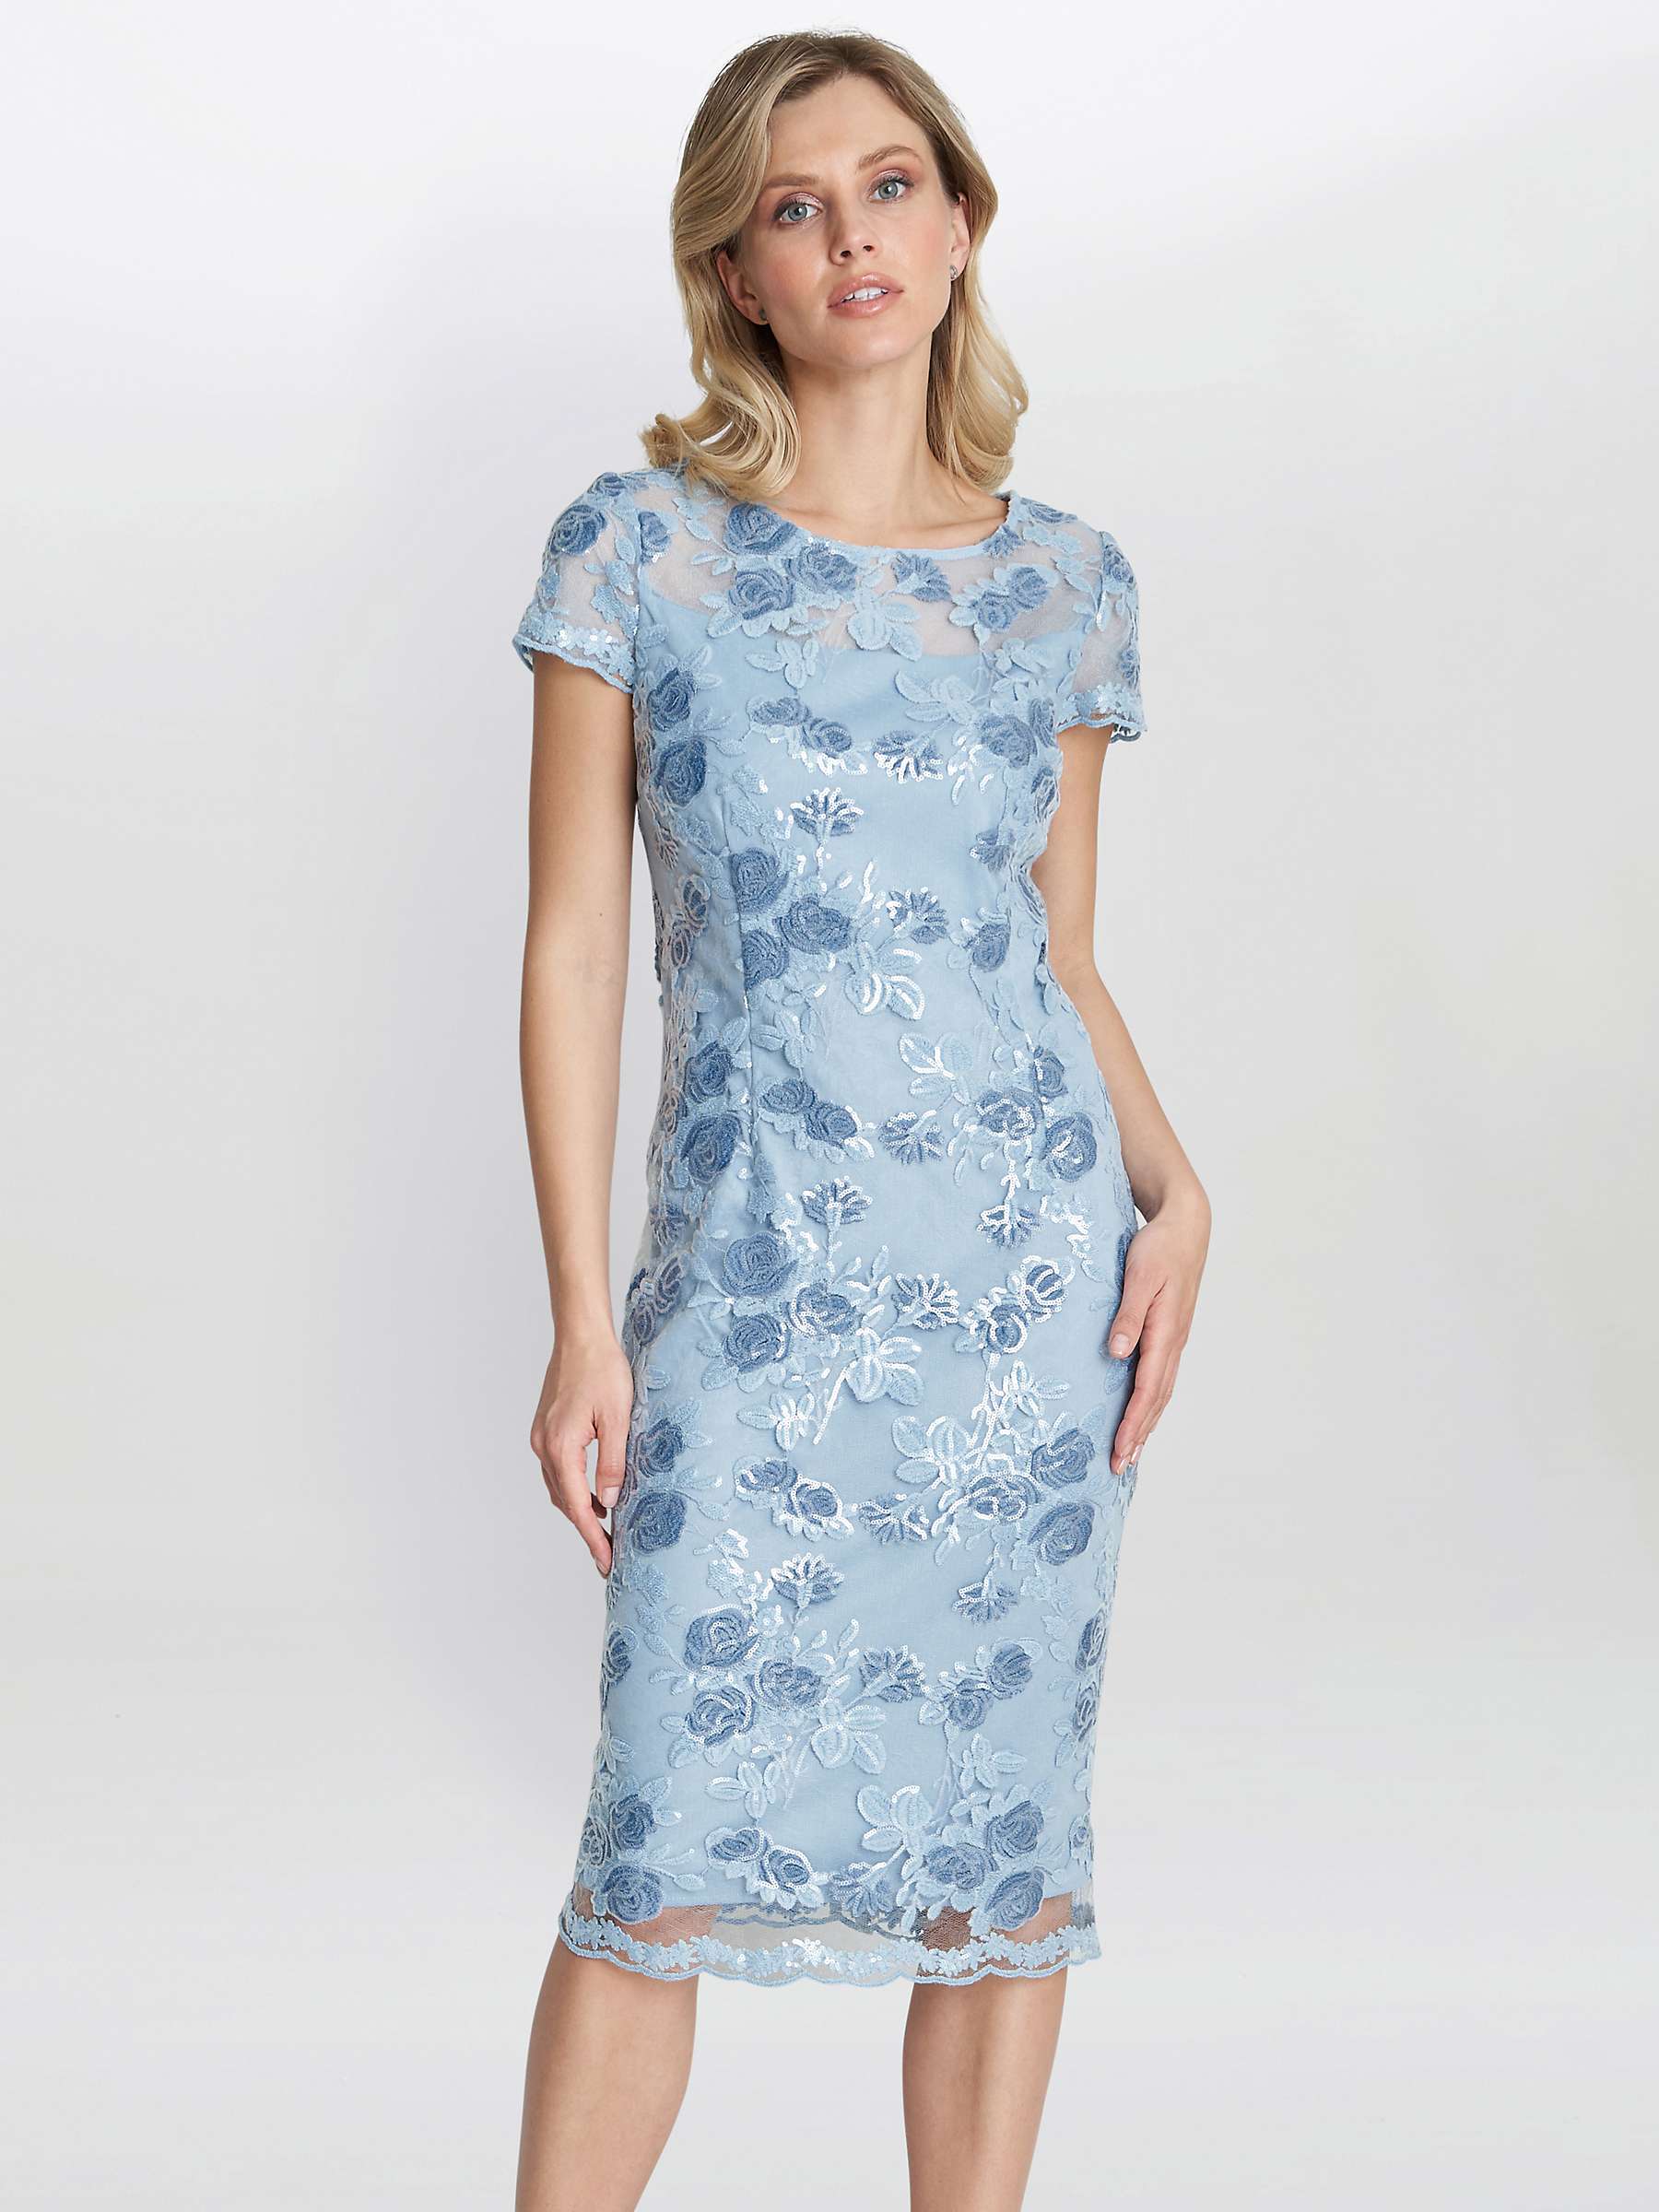 Buy Gina Bacconi Millie Embroidered Lace Midi Shift Dress, Sky Blue Online at johnlewis.com